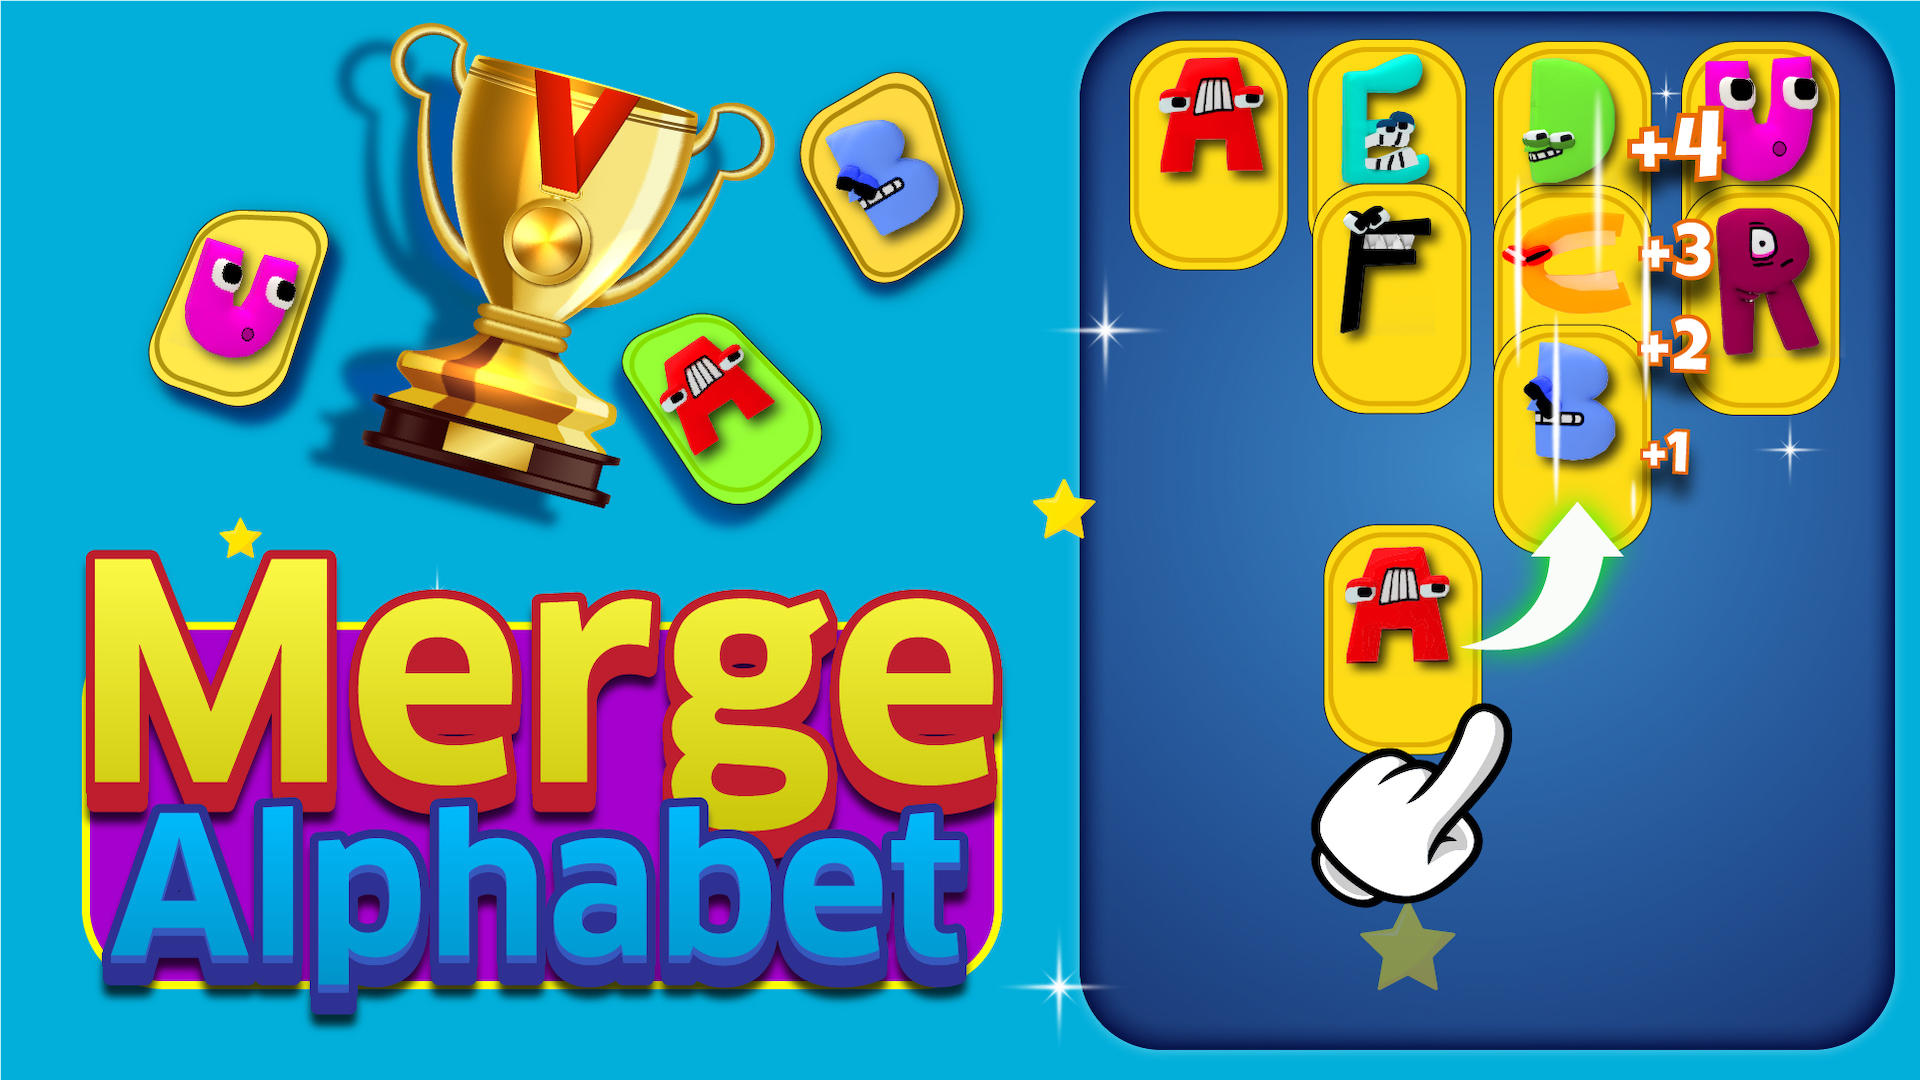 Merge Alphabet Lore APK for Android - Download